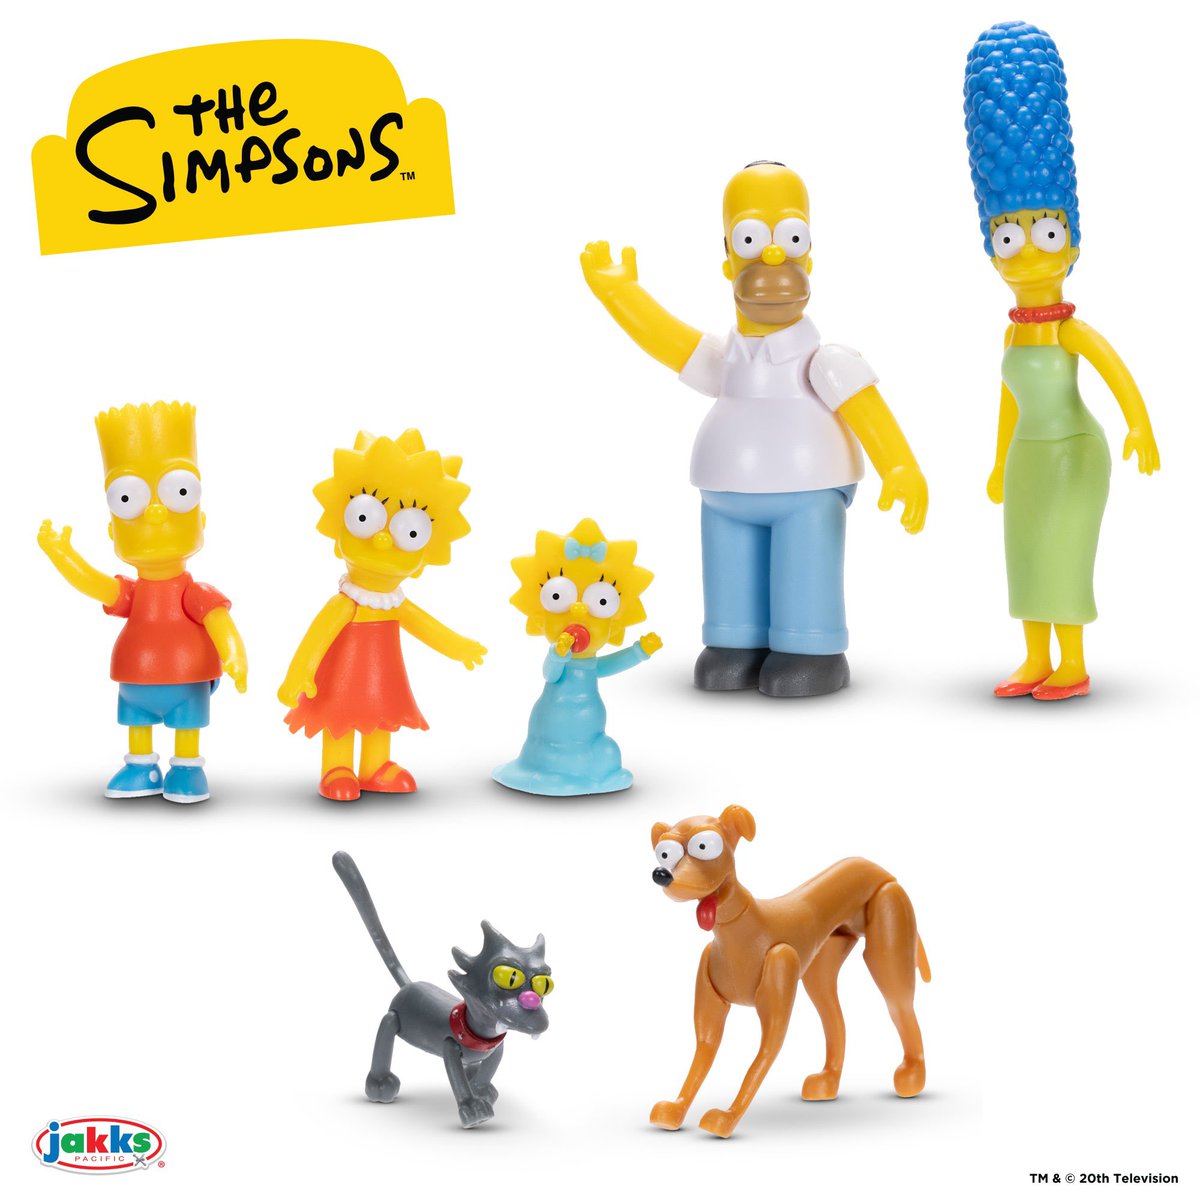 The Simpsons Action Figures Family Multi-Pack By Jakks Pacific
Release Date:1th September 2024
#TheSimpsons #LosSimpsons #Simpsons #Figure #Pack #TheSimpsonsFigure #TheSimpsonsPack #MultiPack #ActionFigure #HomerSimpson #MargeSimpson #BartSimpson #LisaSimpson #MaggieSimpson